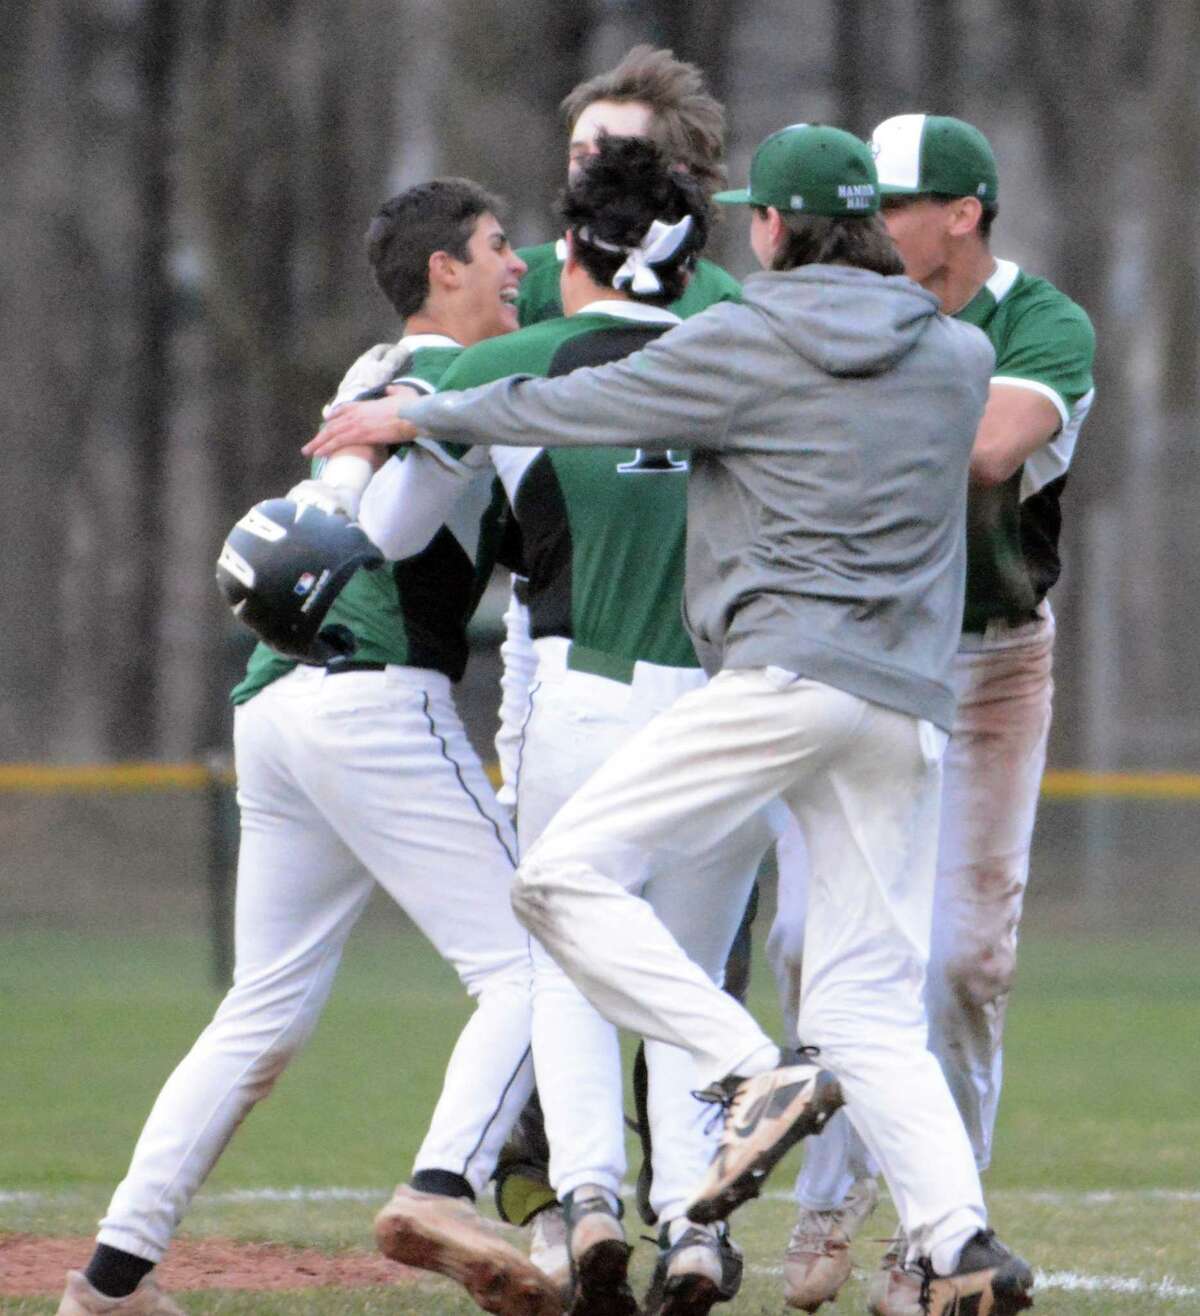 Bennett Crerar, far left, is mobbed at second base after hitting the winning single for Hamden Hall in a 9-8 victory over Hopkins on Tuesday.